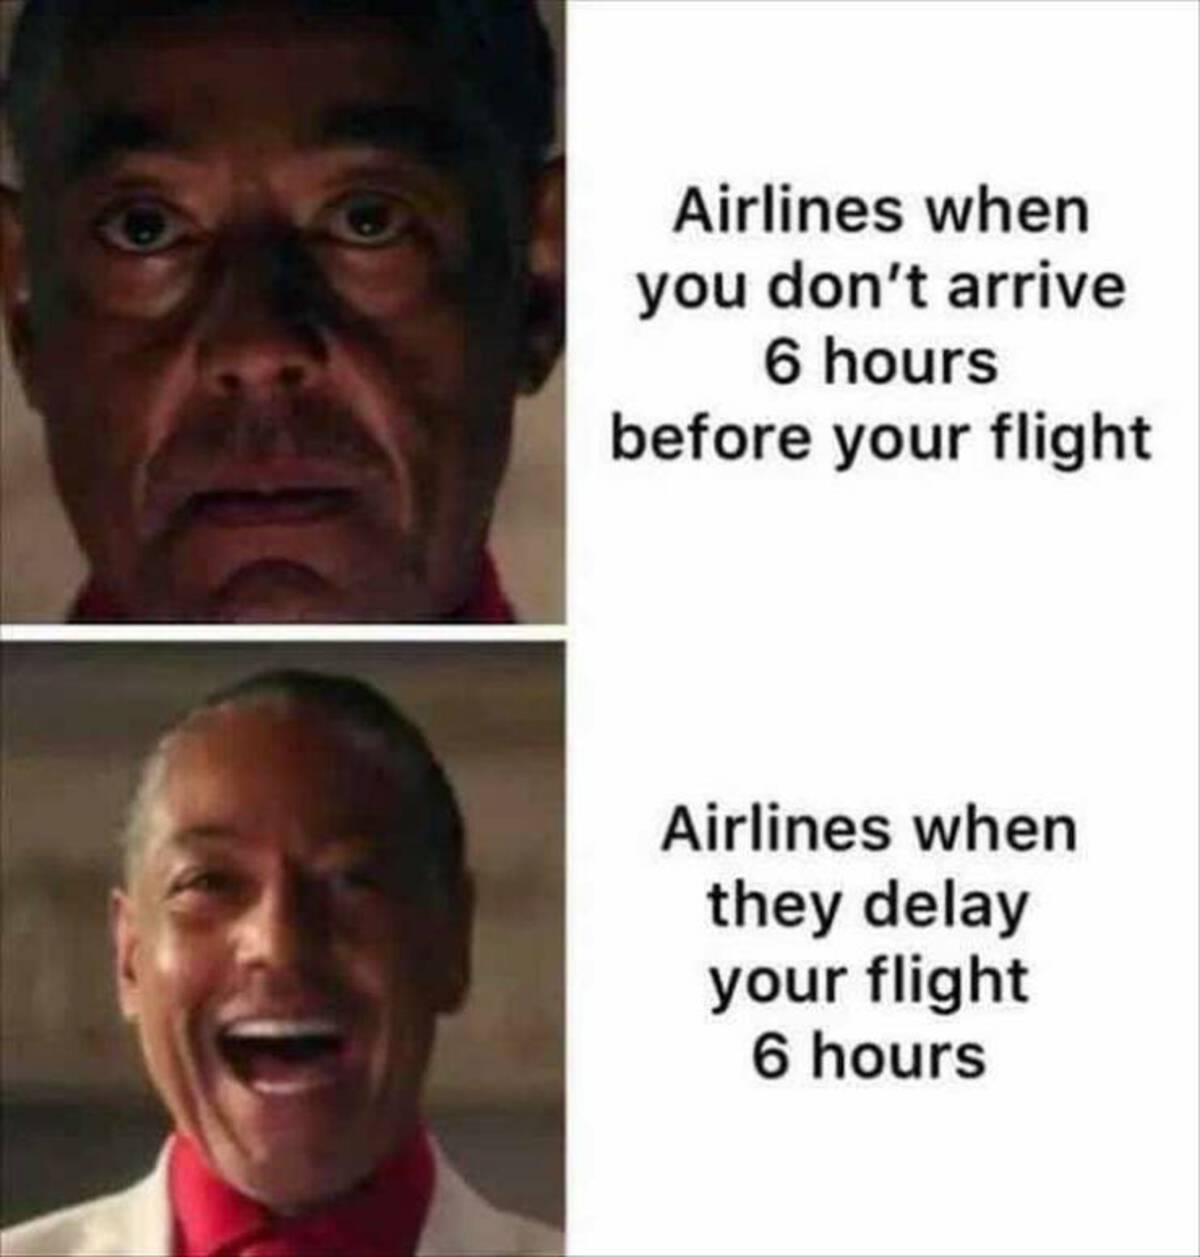 photo caption - Airlines when you don't arrive 6 hours before your flight Airlines when they delay your flight 6 hours